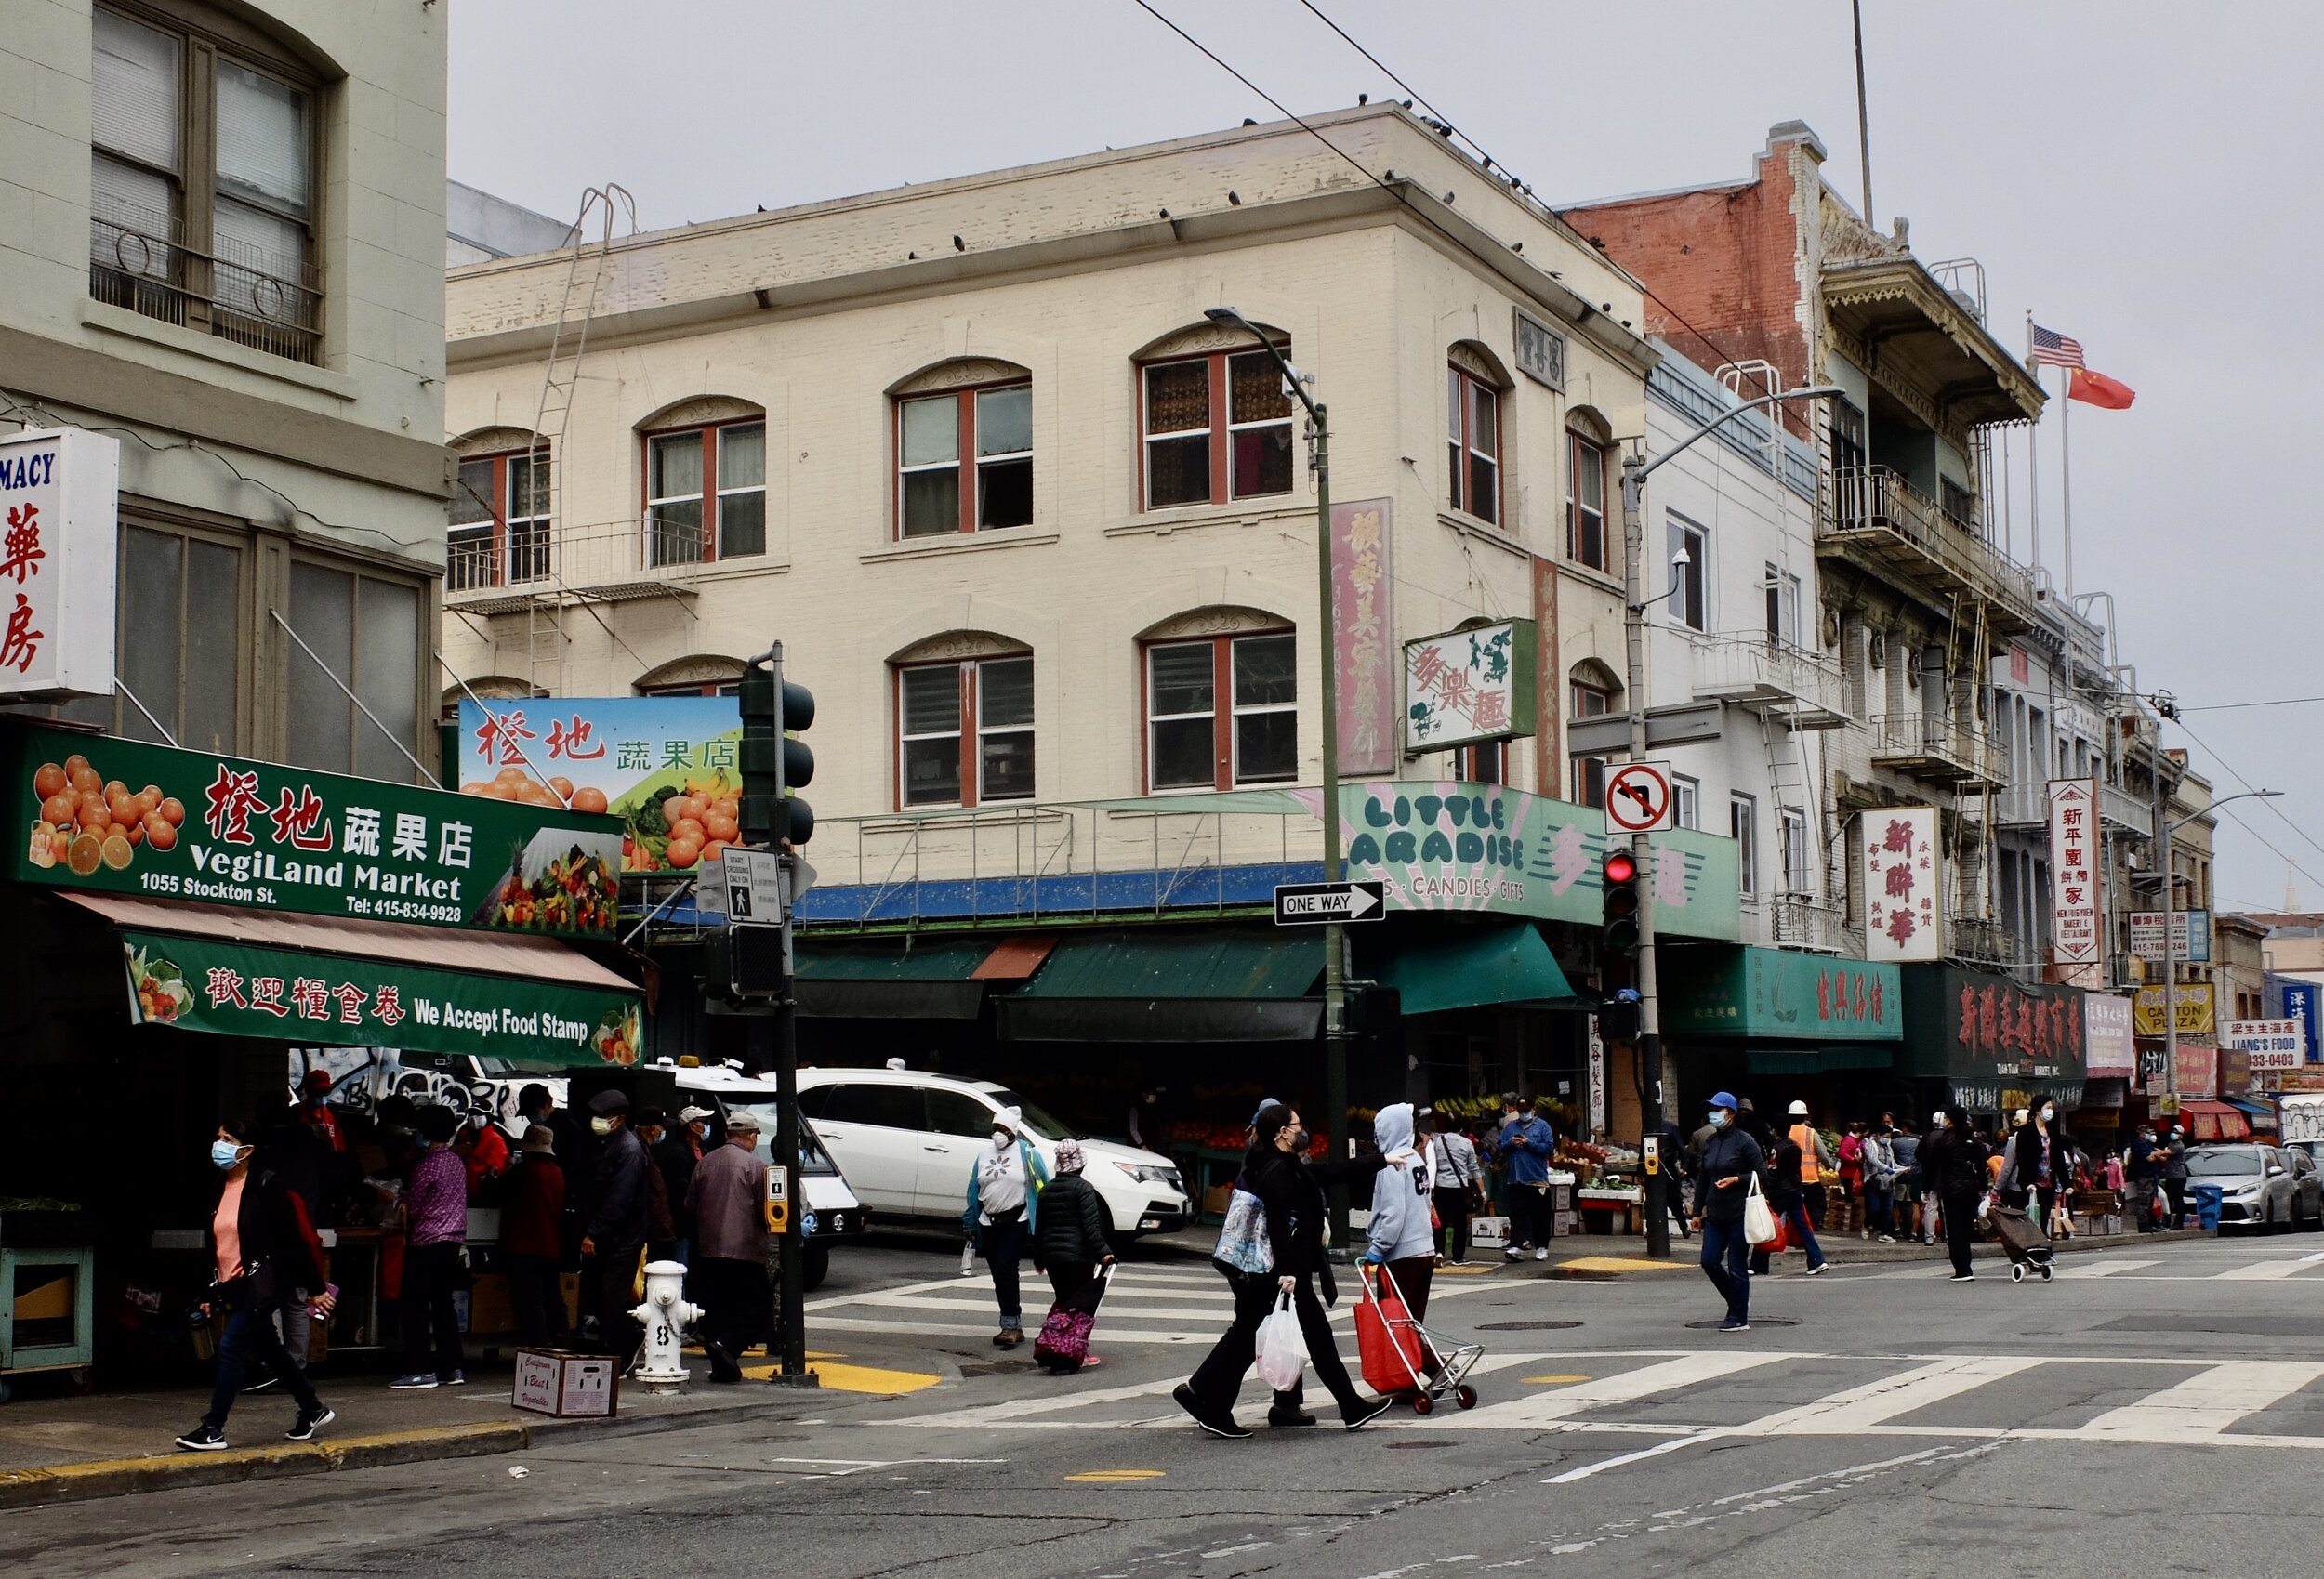 Chinatown, along Stockton St., was bustling.